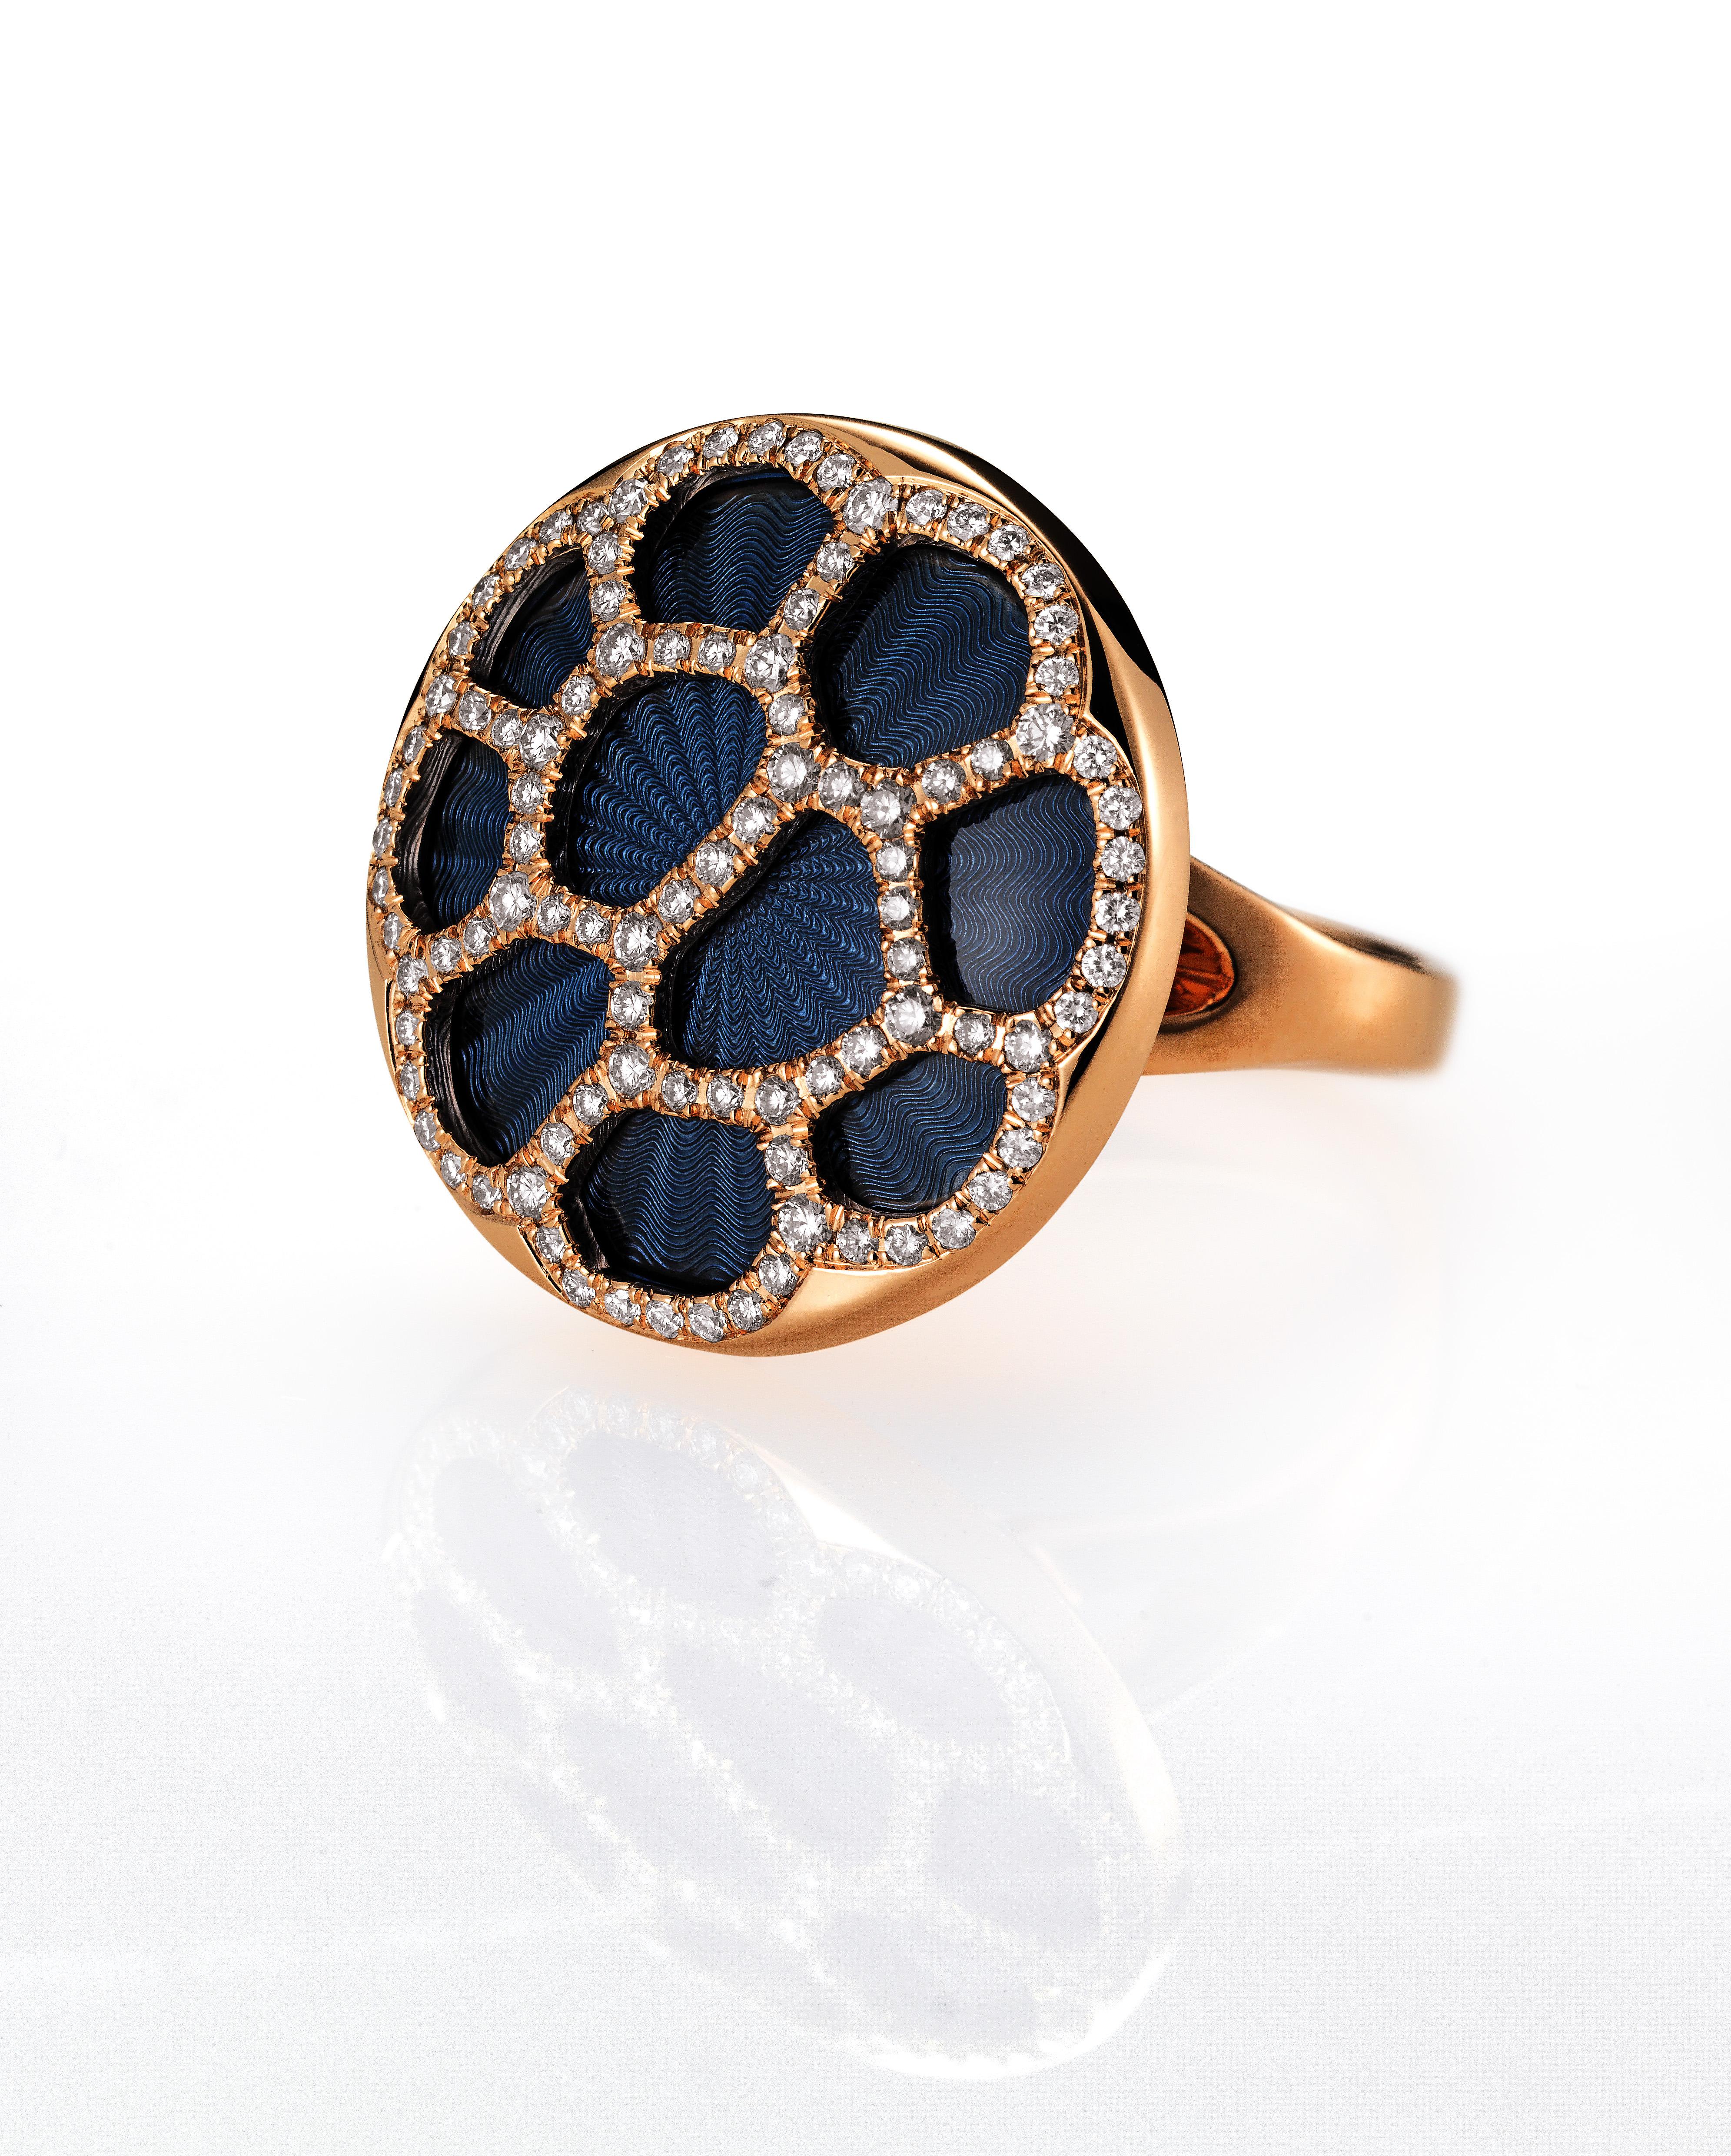 Victor Mayer Constance Light Blue Enamel Ring 18k Rose Gold with Diamonds In New Condition For Sale In Pforzheim, DE